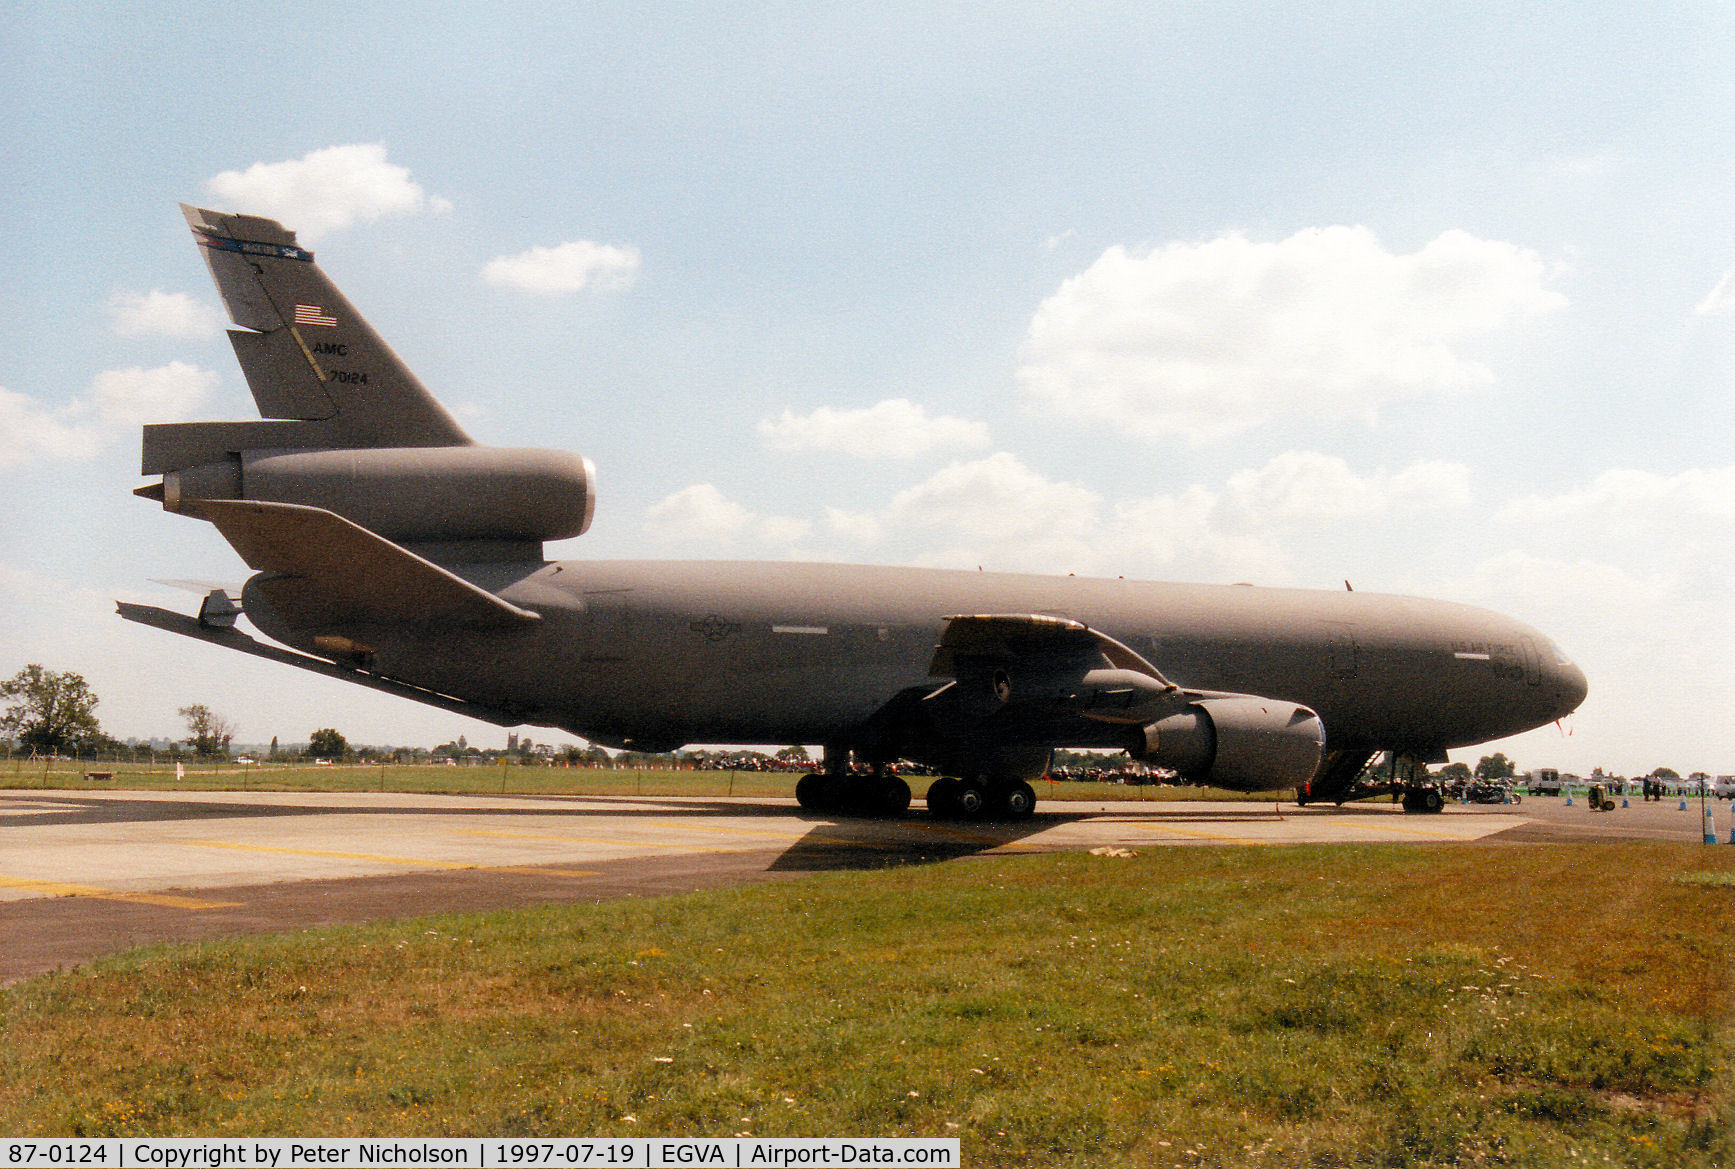 87-0124, 1987 McDonnell Douglas KC-10A Extender C/N 48310, KC-10A Extender, callsign Reach 7124, of 2nd Air Refuelling Squadron at McGuire AFB on display at the 1997 Intnl Air Tattoo at RAF Fairford.